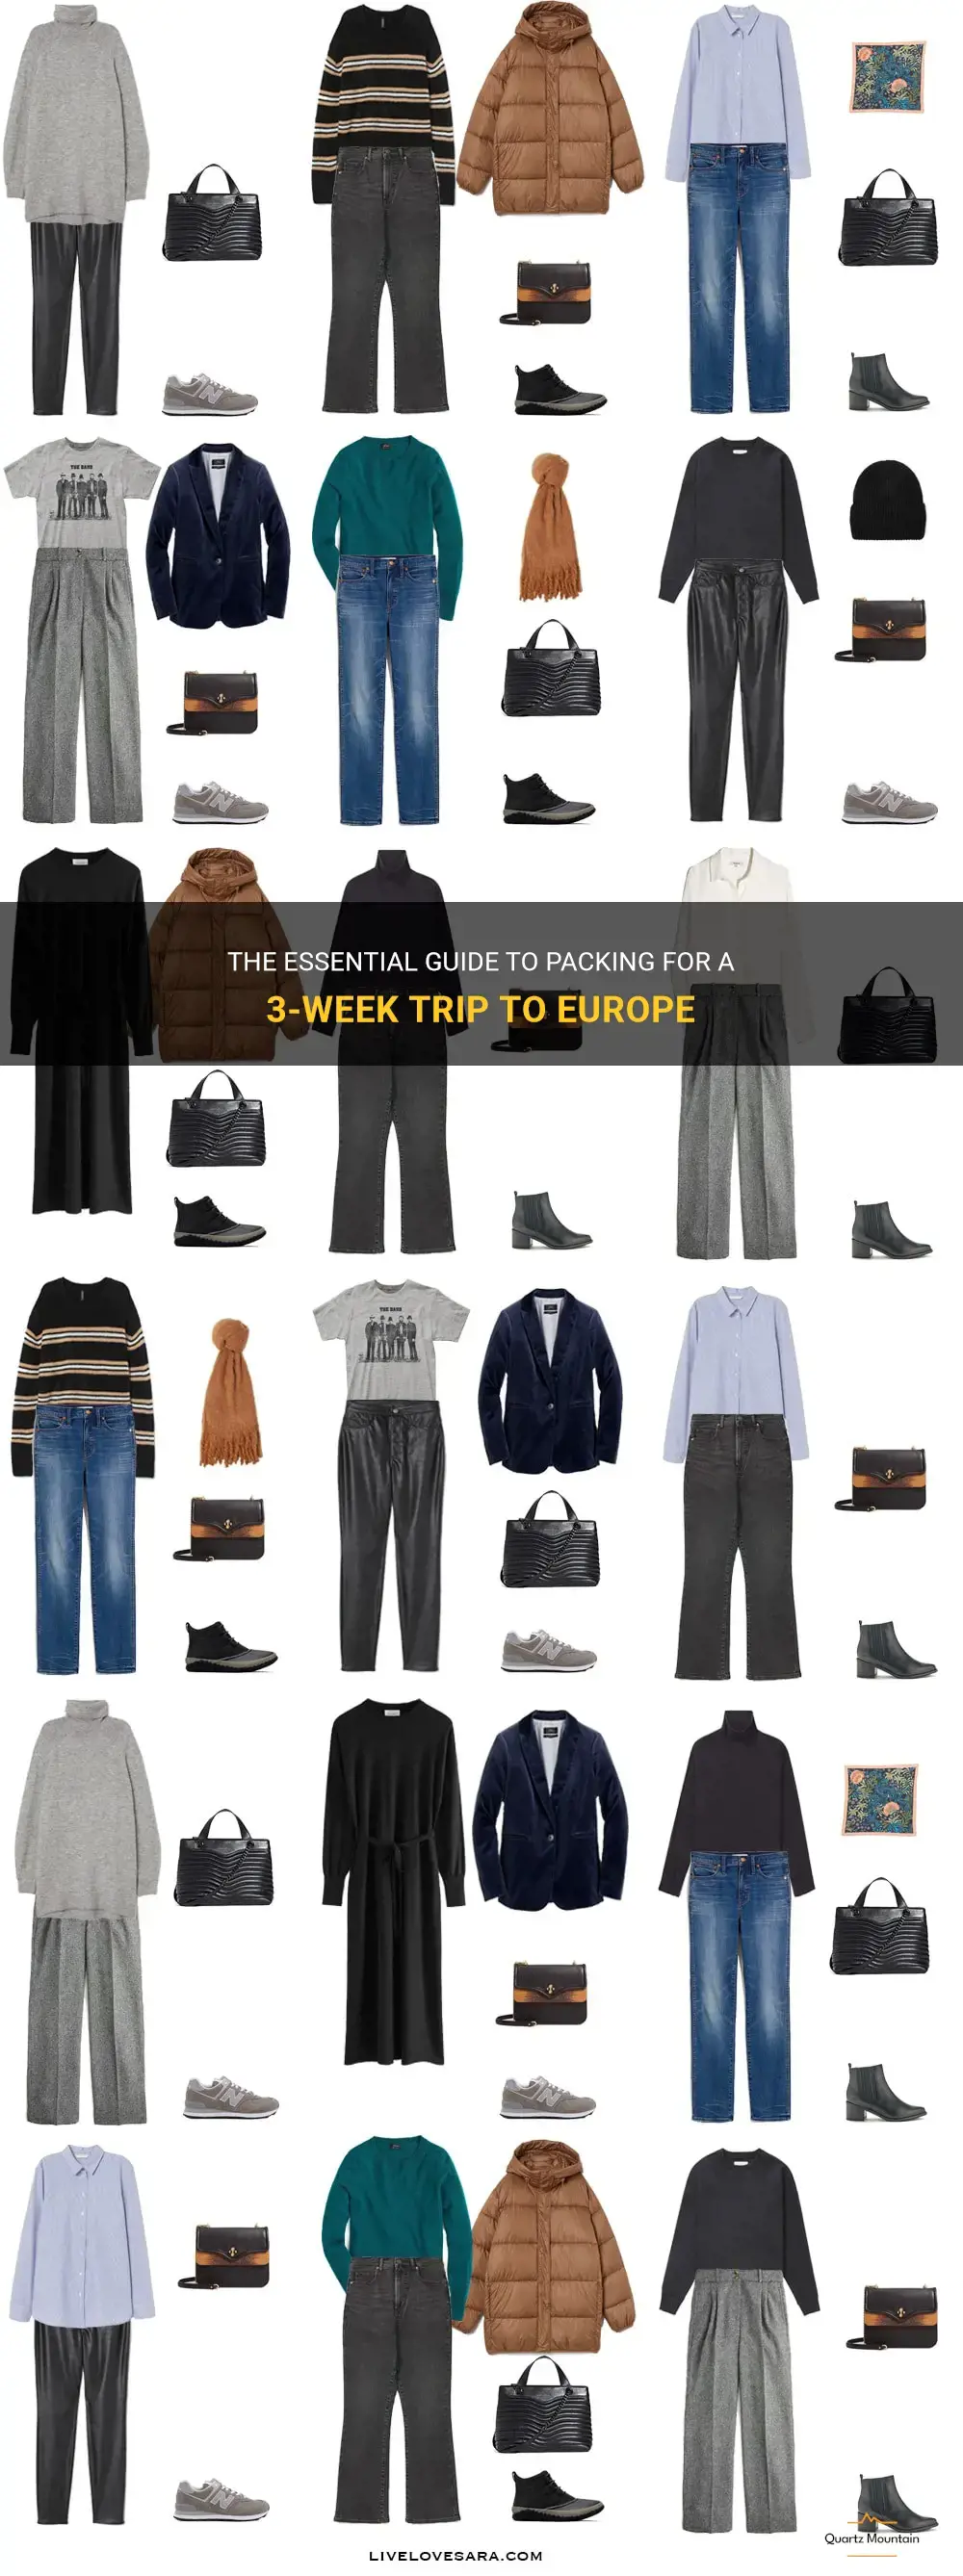 The Essential Guide To Packing For A 3-Week Trip To Europe | QuartzMountain